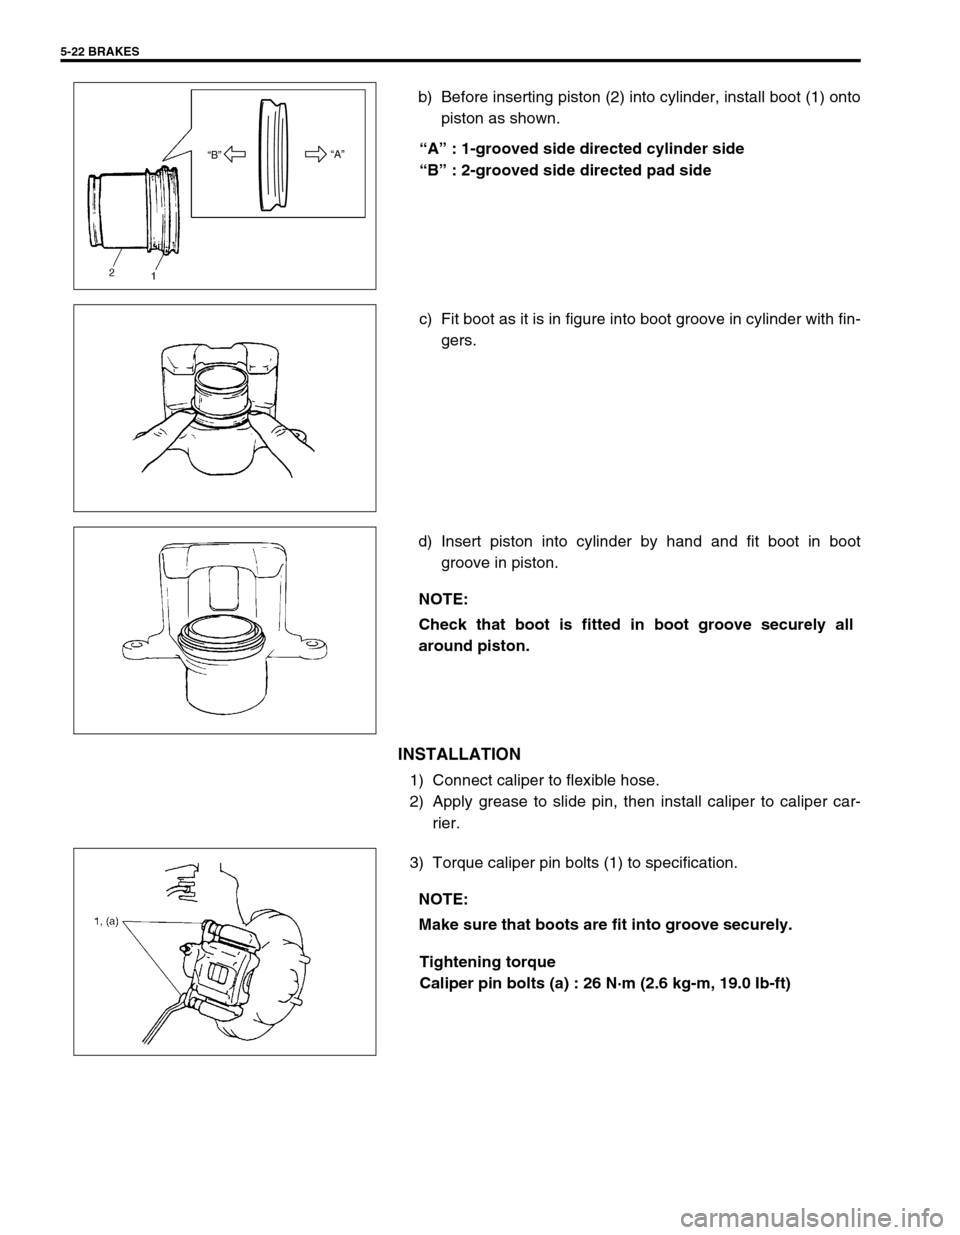 SUZUKI SWIFT 2000 1.G RG413 Service Owners Manual 5-22 BRAKES
b) Before inserting piston (2) into cylinder, install boot (1) onto
piston as shown.
“A” : 1-grooved side directed cylinder side
“B” : 2-grooved side directed pad side
c) Fit boot 